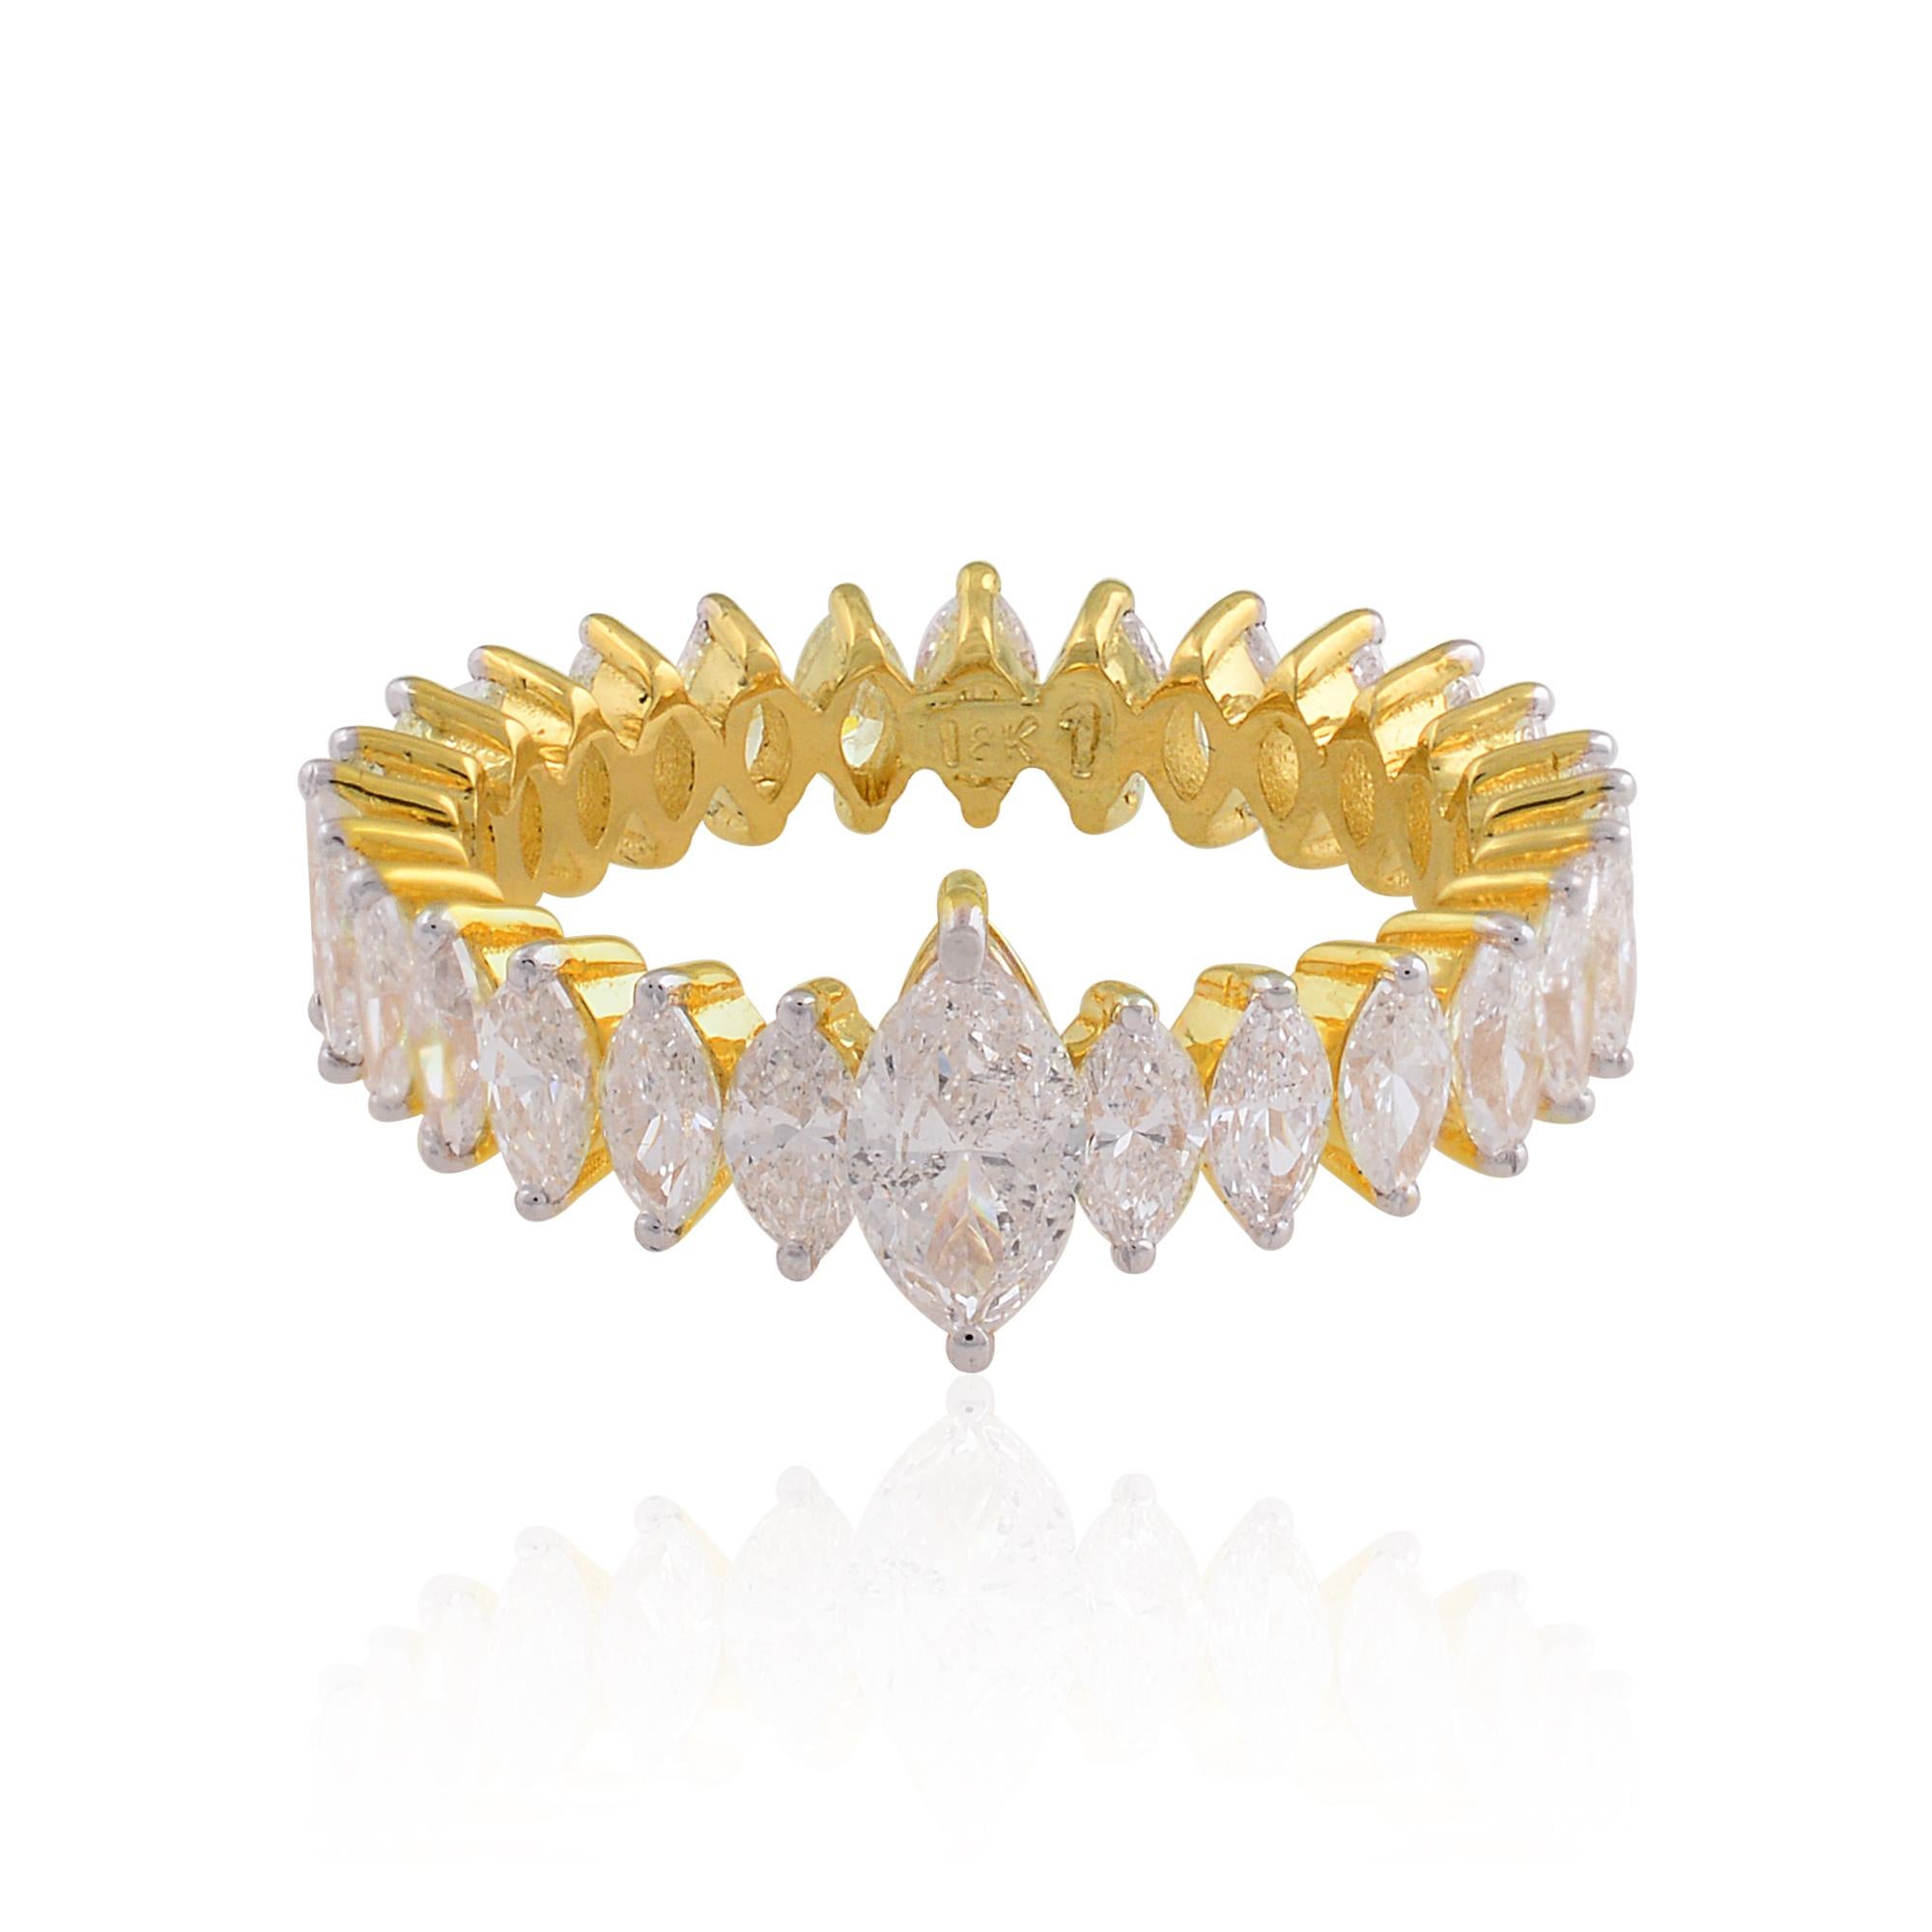 For Sale:  2.60 Carat Marquise Diamond Band Ring Solid 18k Yellow Gold Handmade Jewelry 5